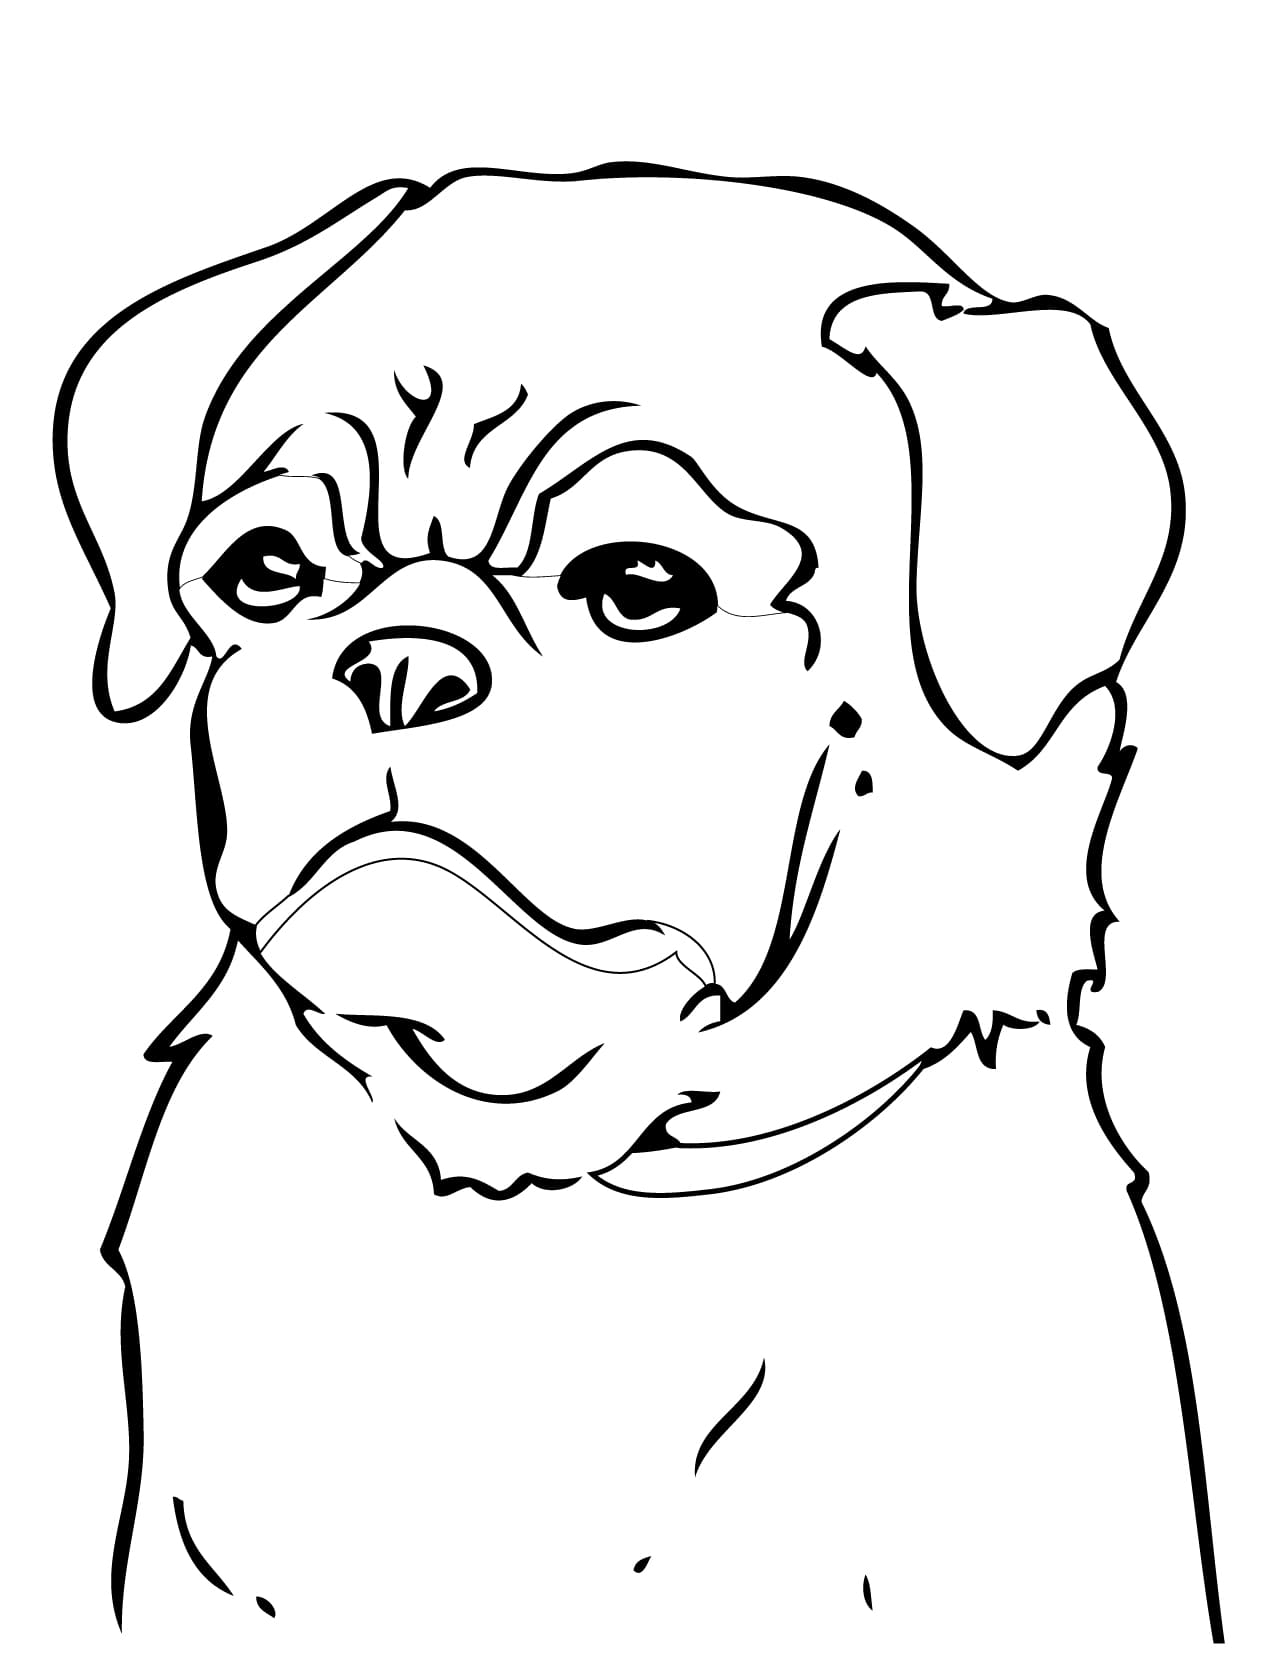 Pug Dog Coloring Pages to Print Coloring Page